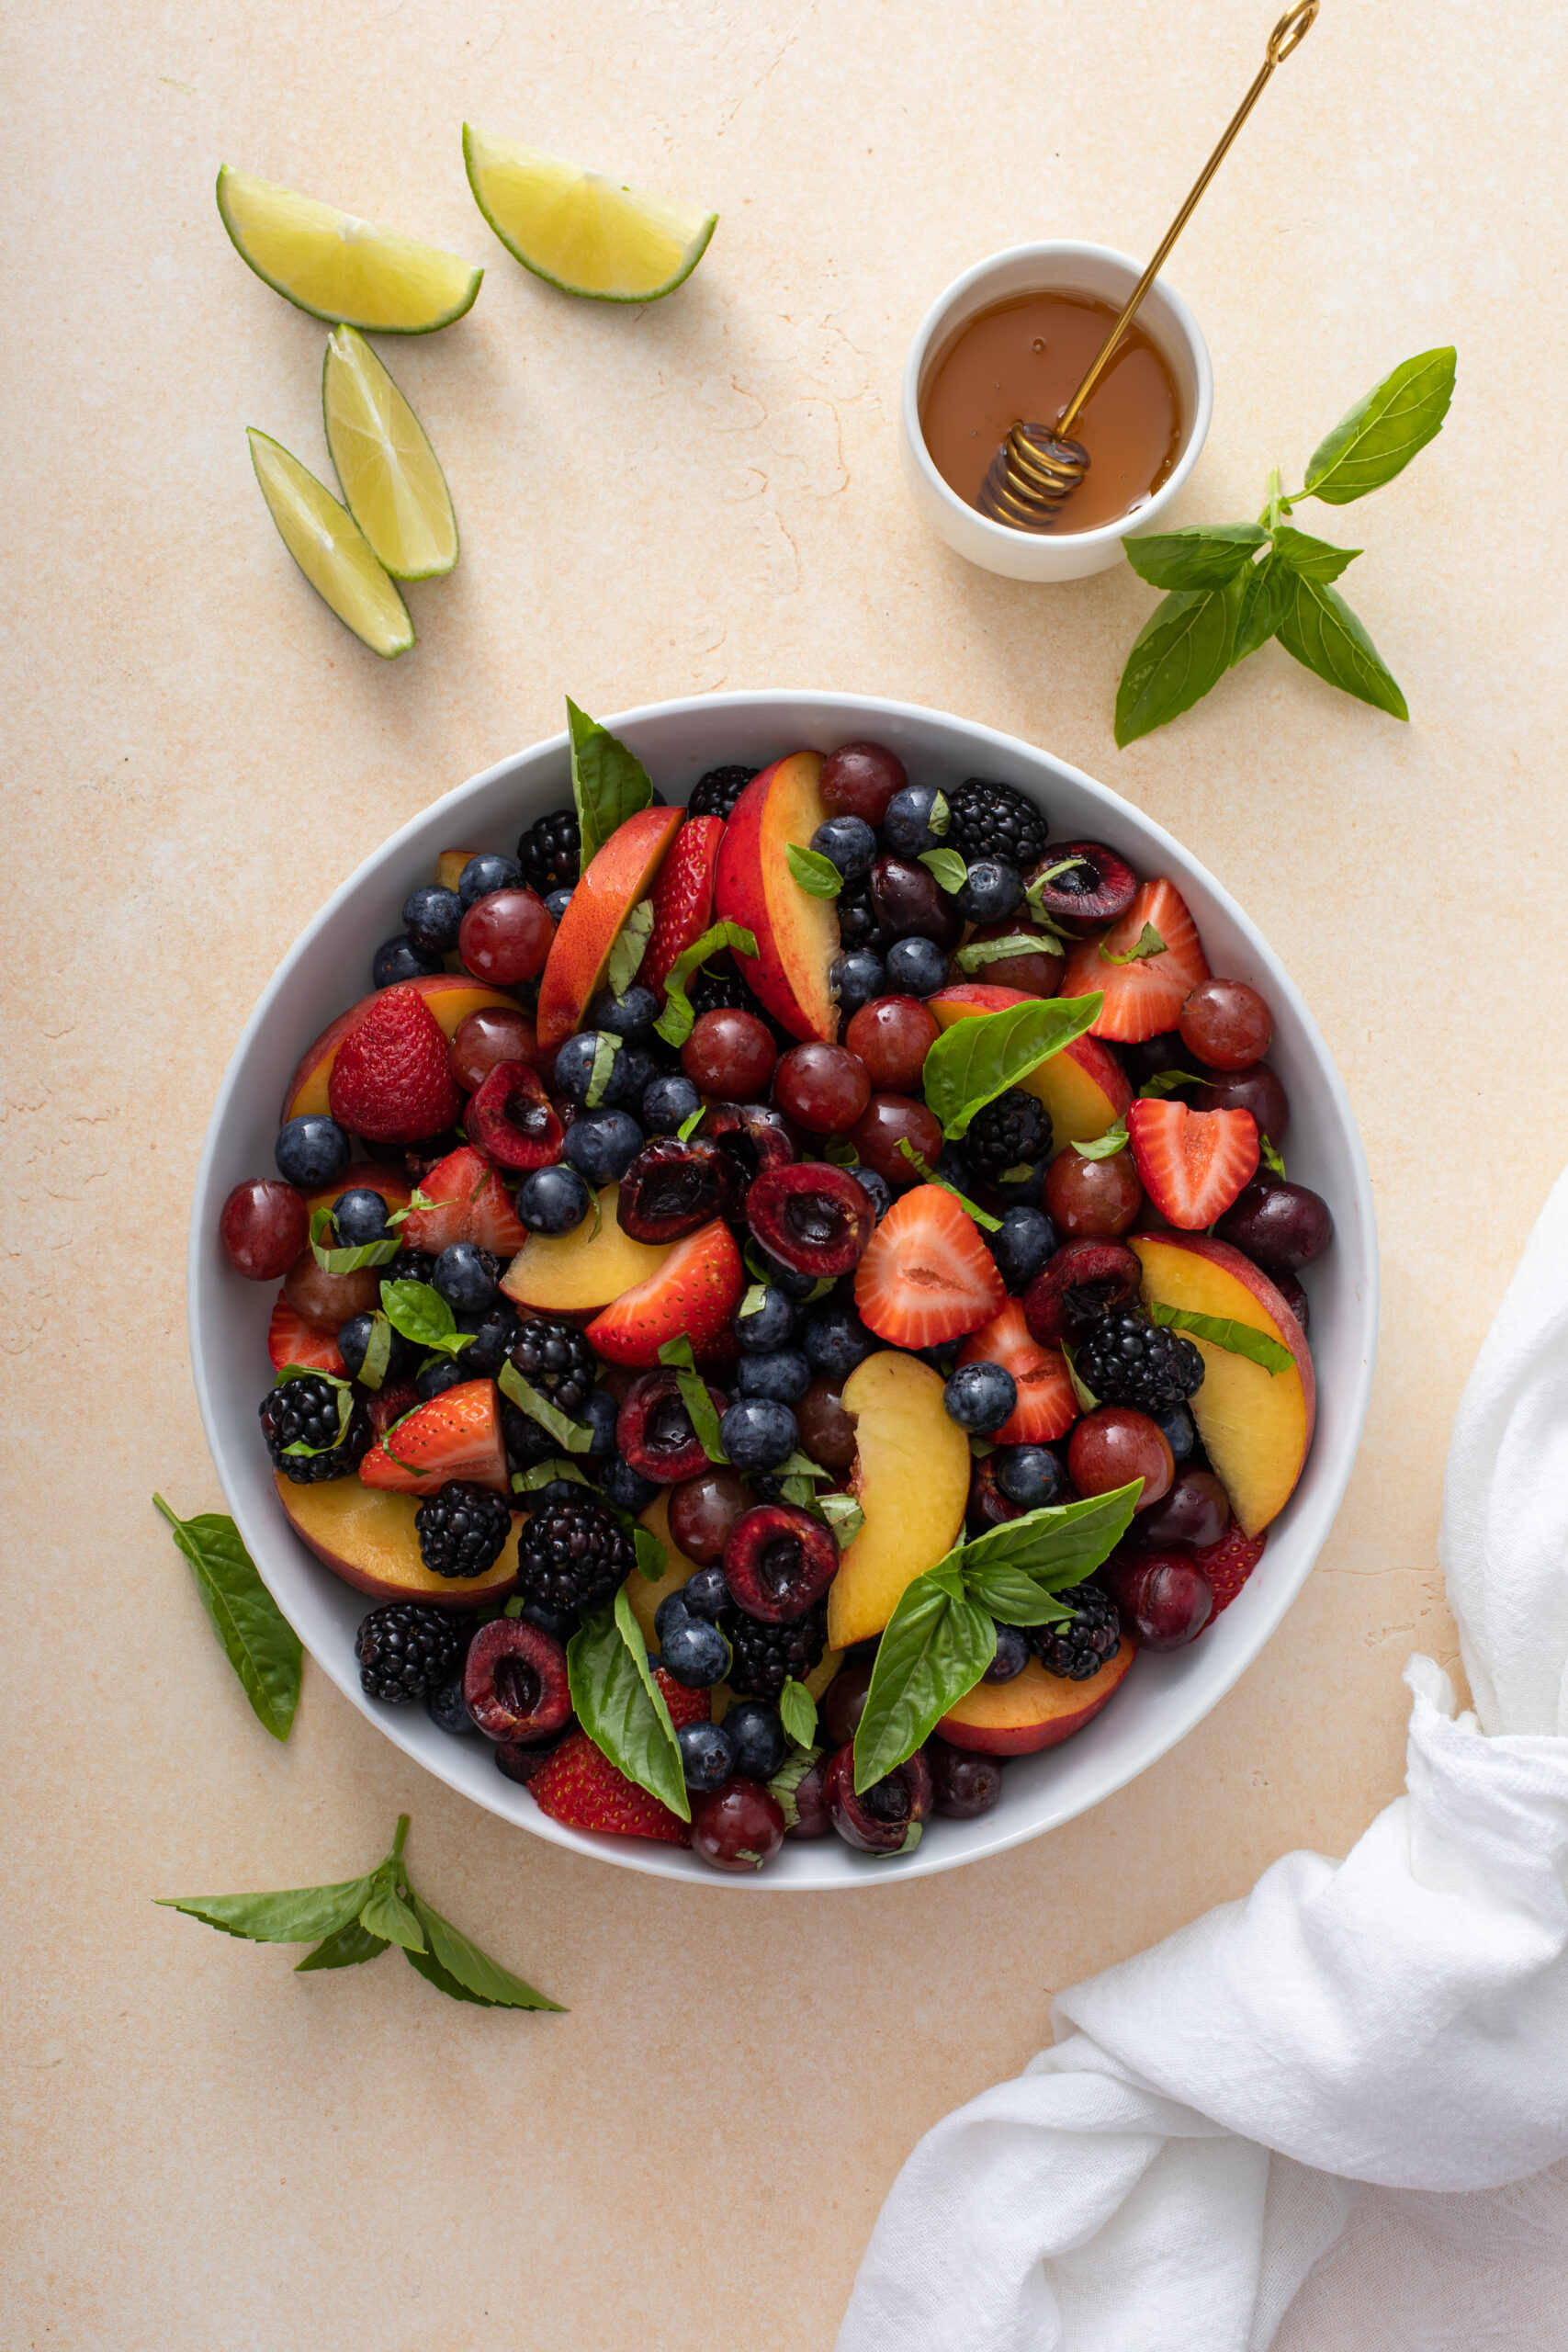 Hands down the perfect summertime peach fruit salad that will be a hit at any summer soiree this year! Curious how to make this Honey Lime Basil Peach Fruit Salad? CLICK HERE for the recipe!